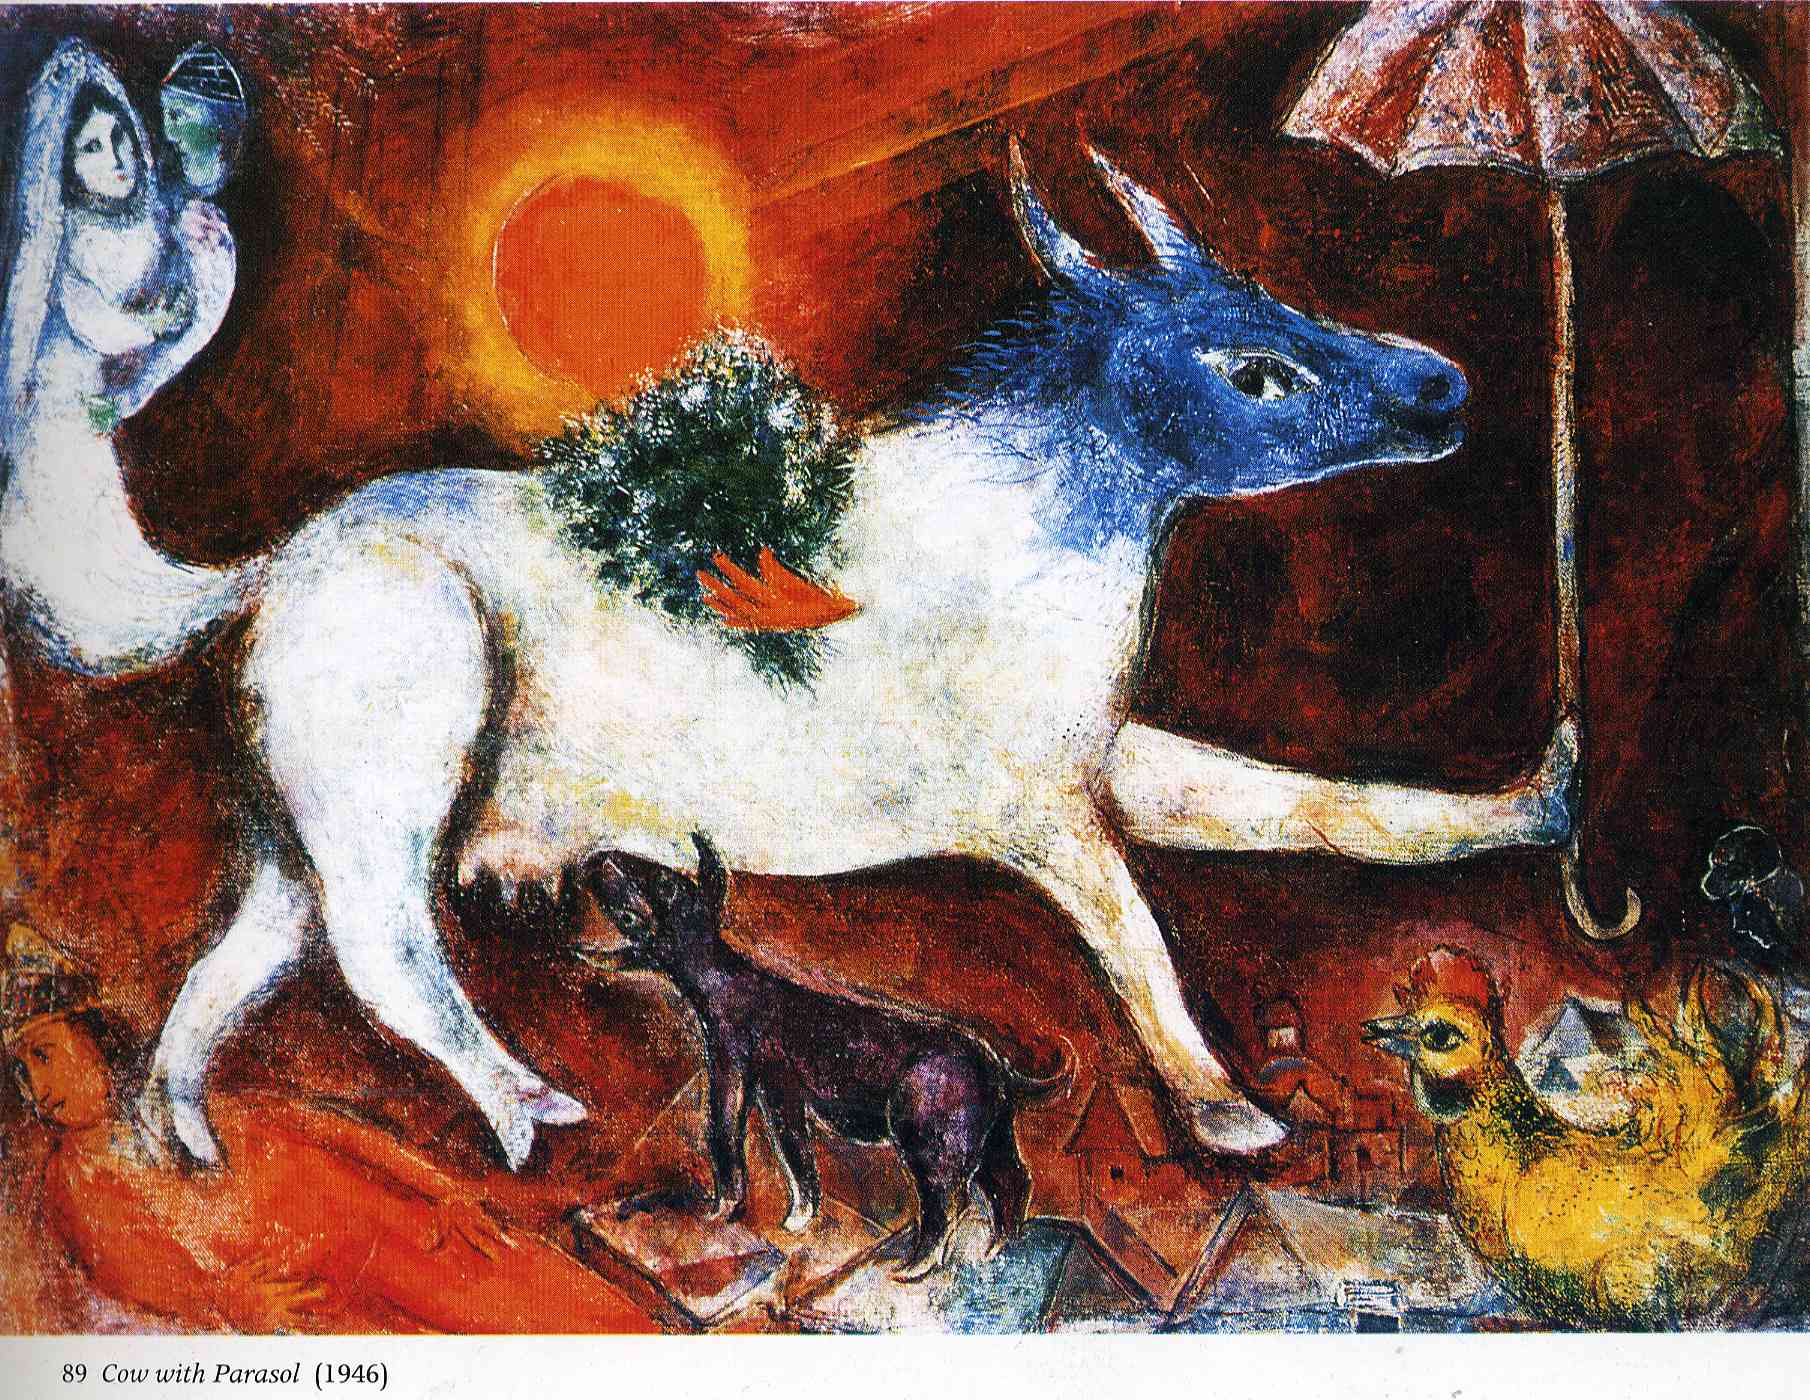 Cow with Parasol (1946).